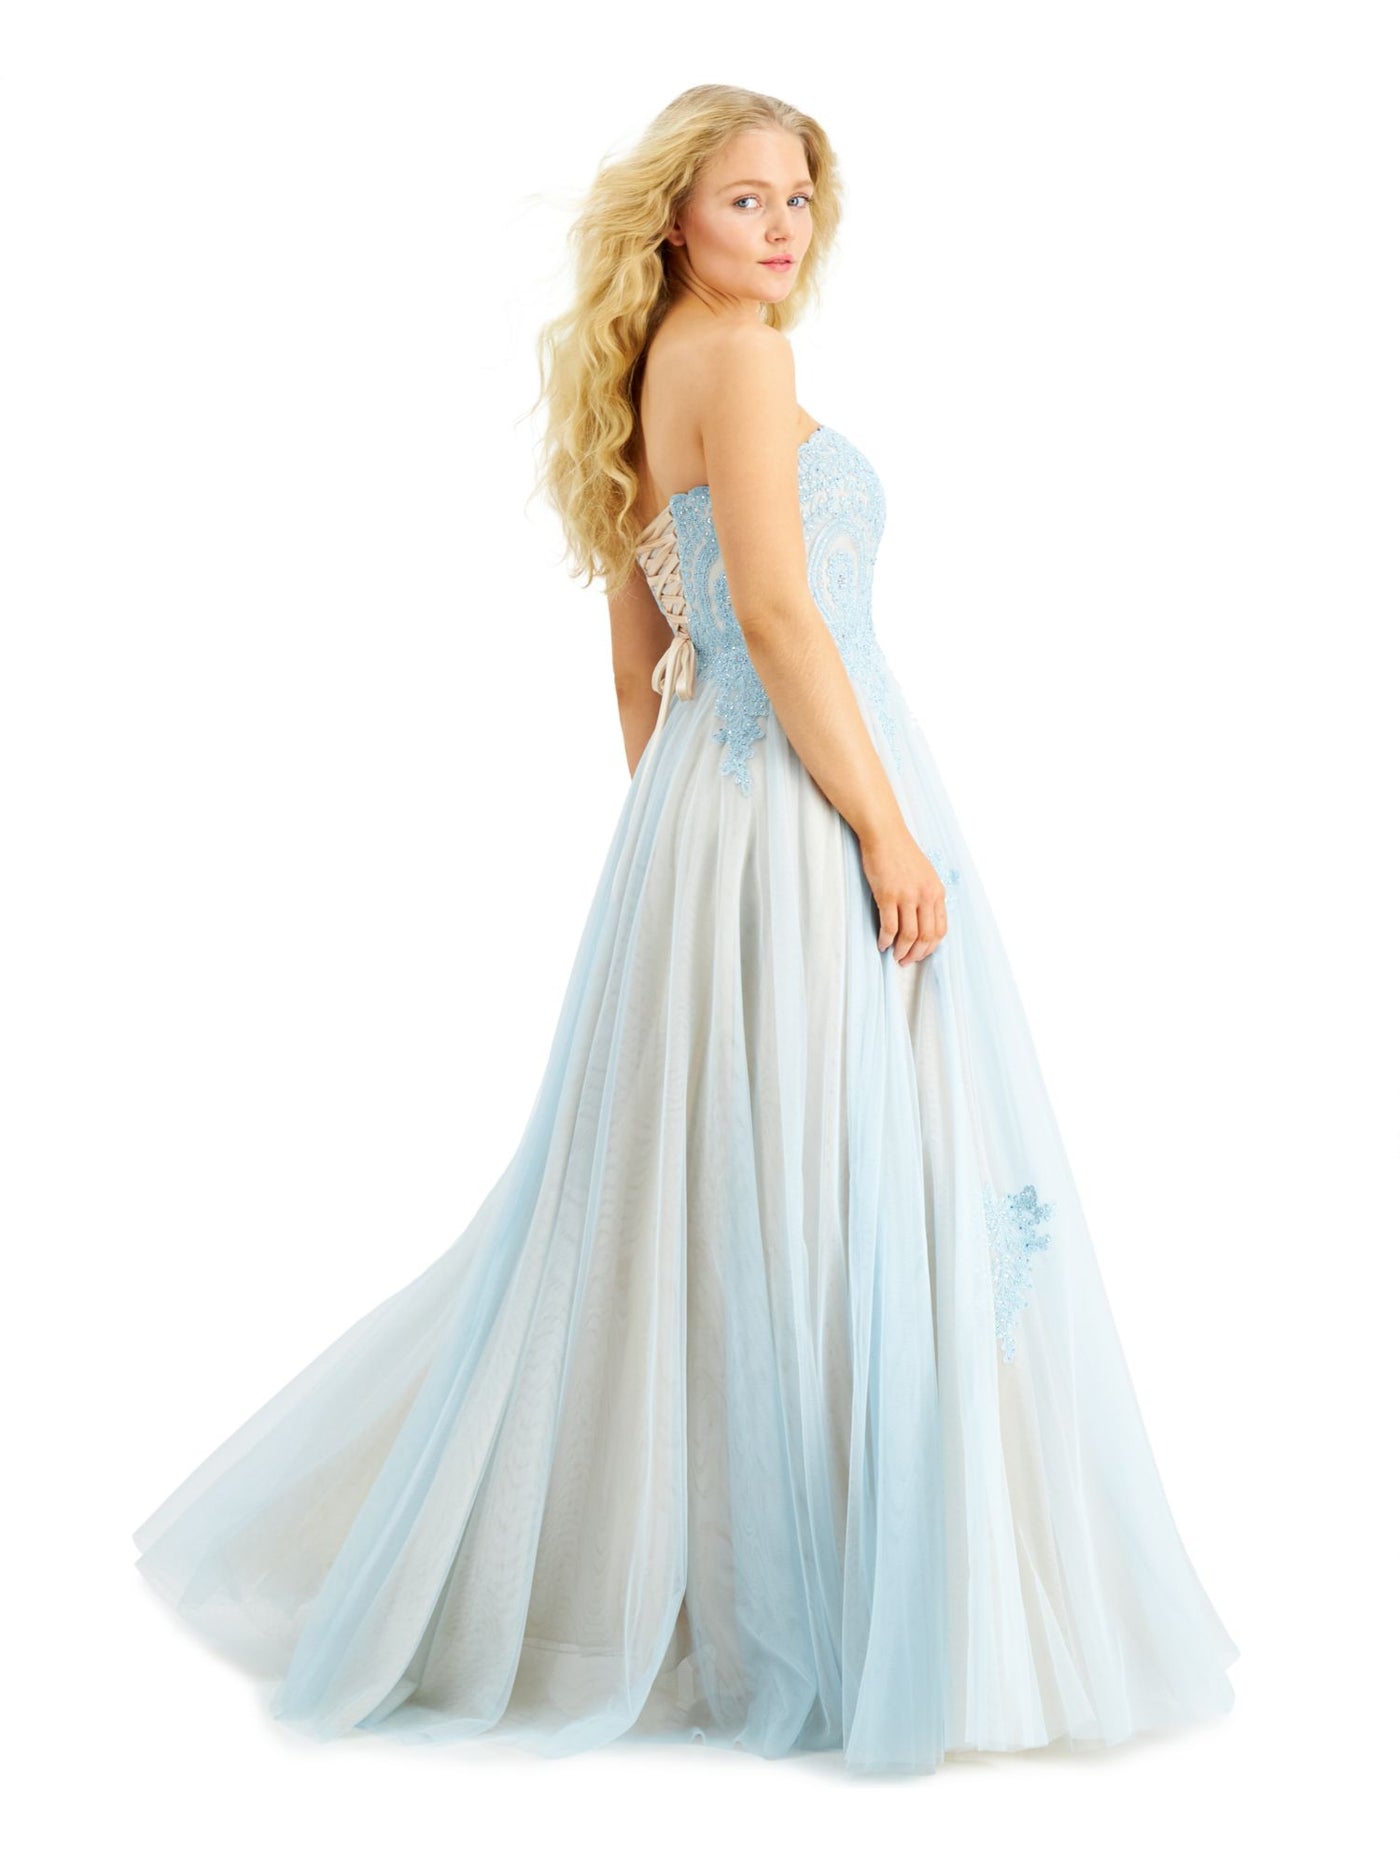 SAY YES TO THE PROM Womens Light Blue Embellished Sheer Patterned Spaghetti Strap Sweetheart Neckline Full-Length Formal Fit + Flare Dress Juniors 7